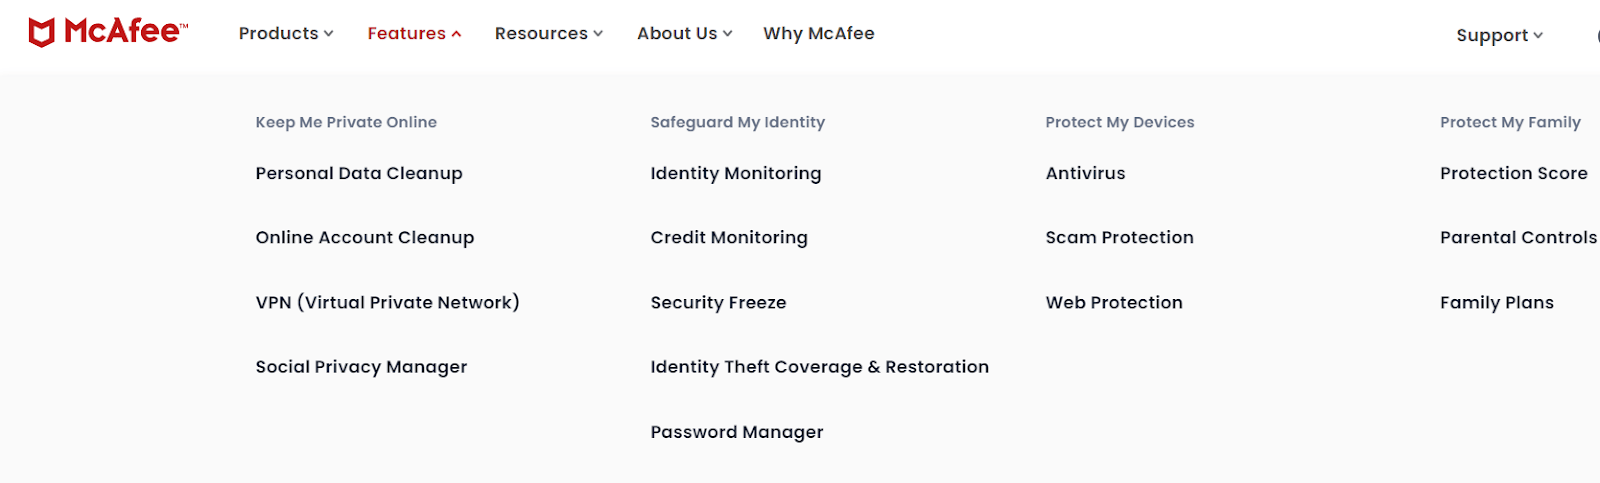 A screenshot of McAfee homepage showing all the services offered 